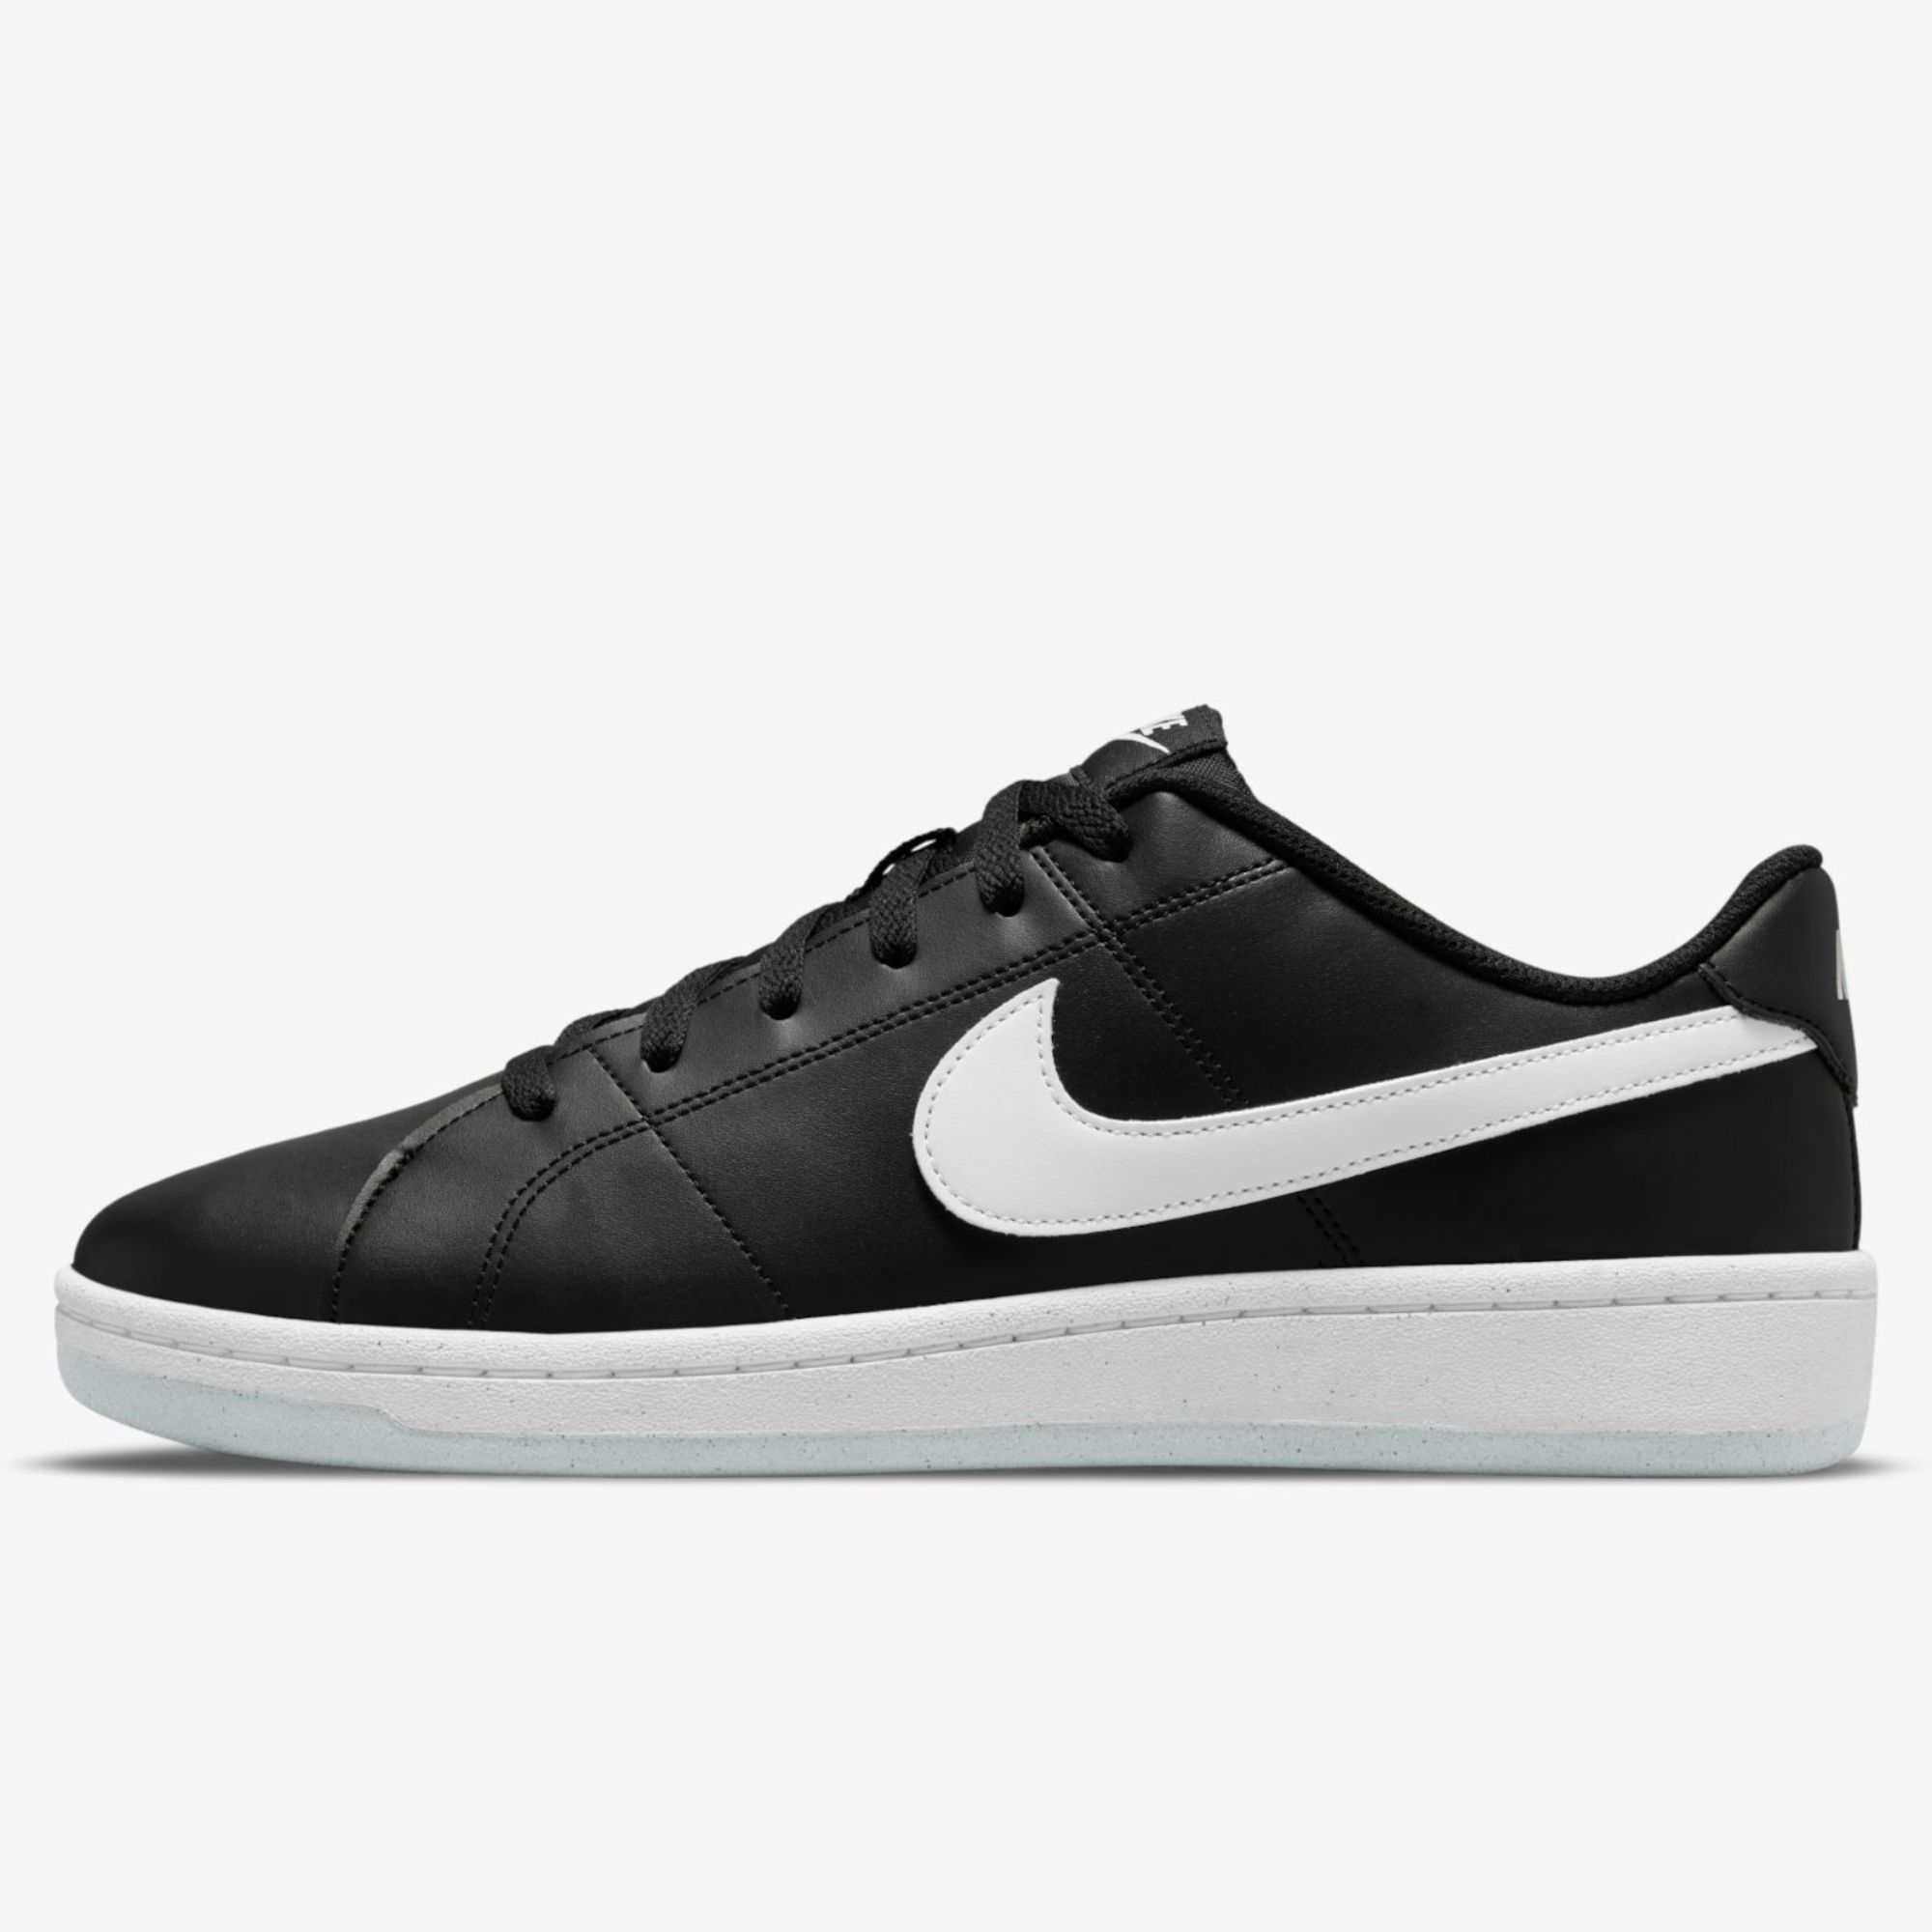 TENIS NIKE MASCULINO COURT ROYALE 2 DH3160